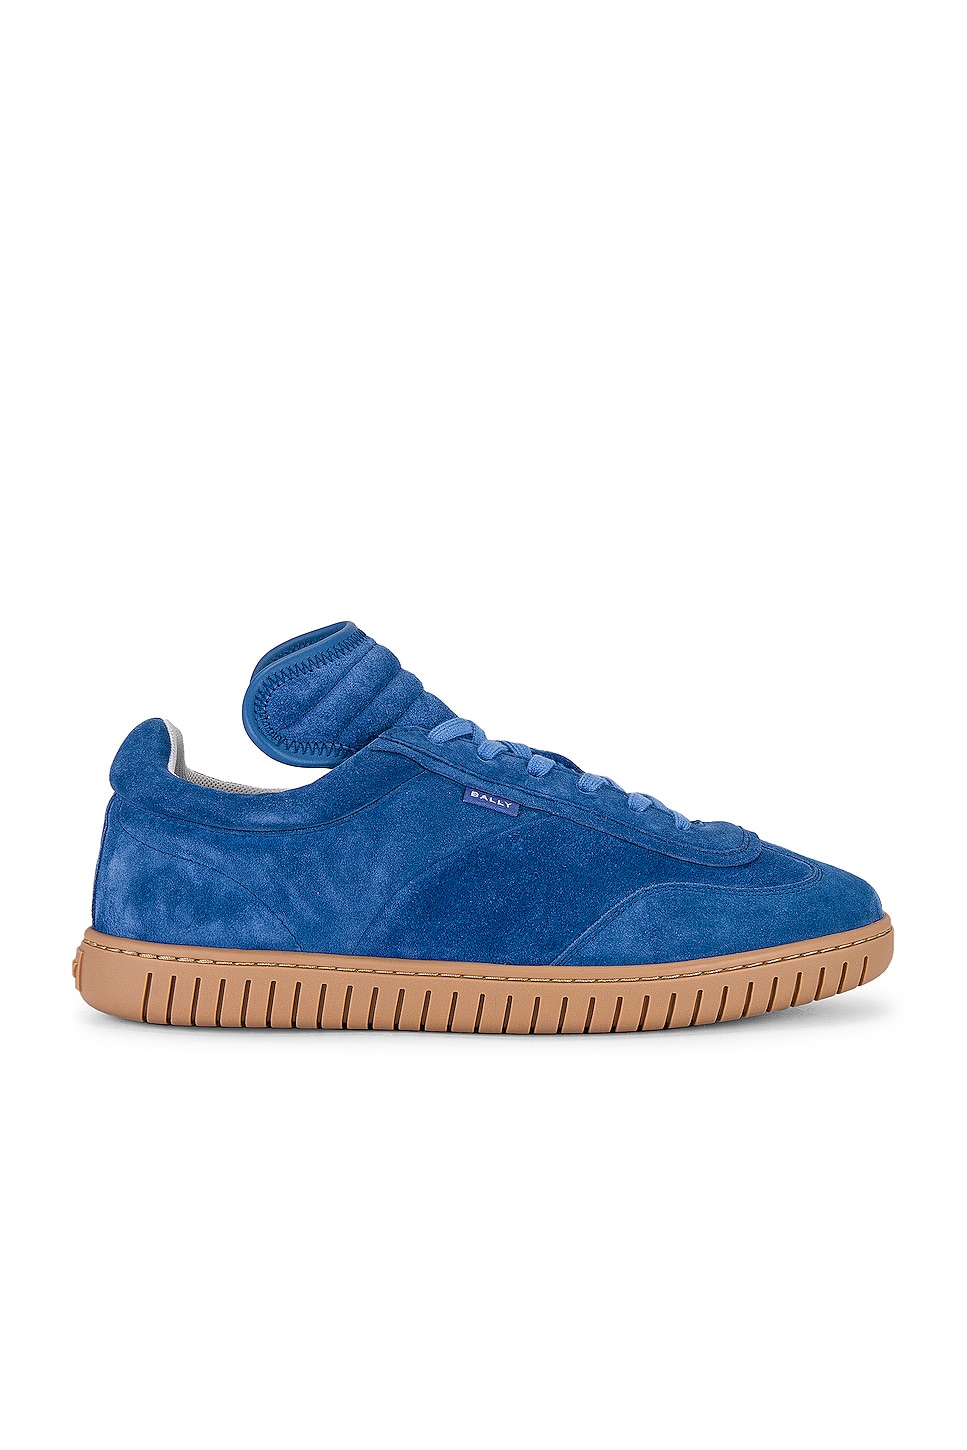 Image 1 of Bally Parrel Sneakers in Blue Kiss & Ambra